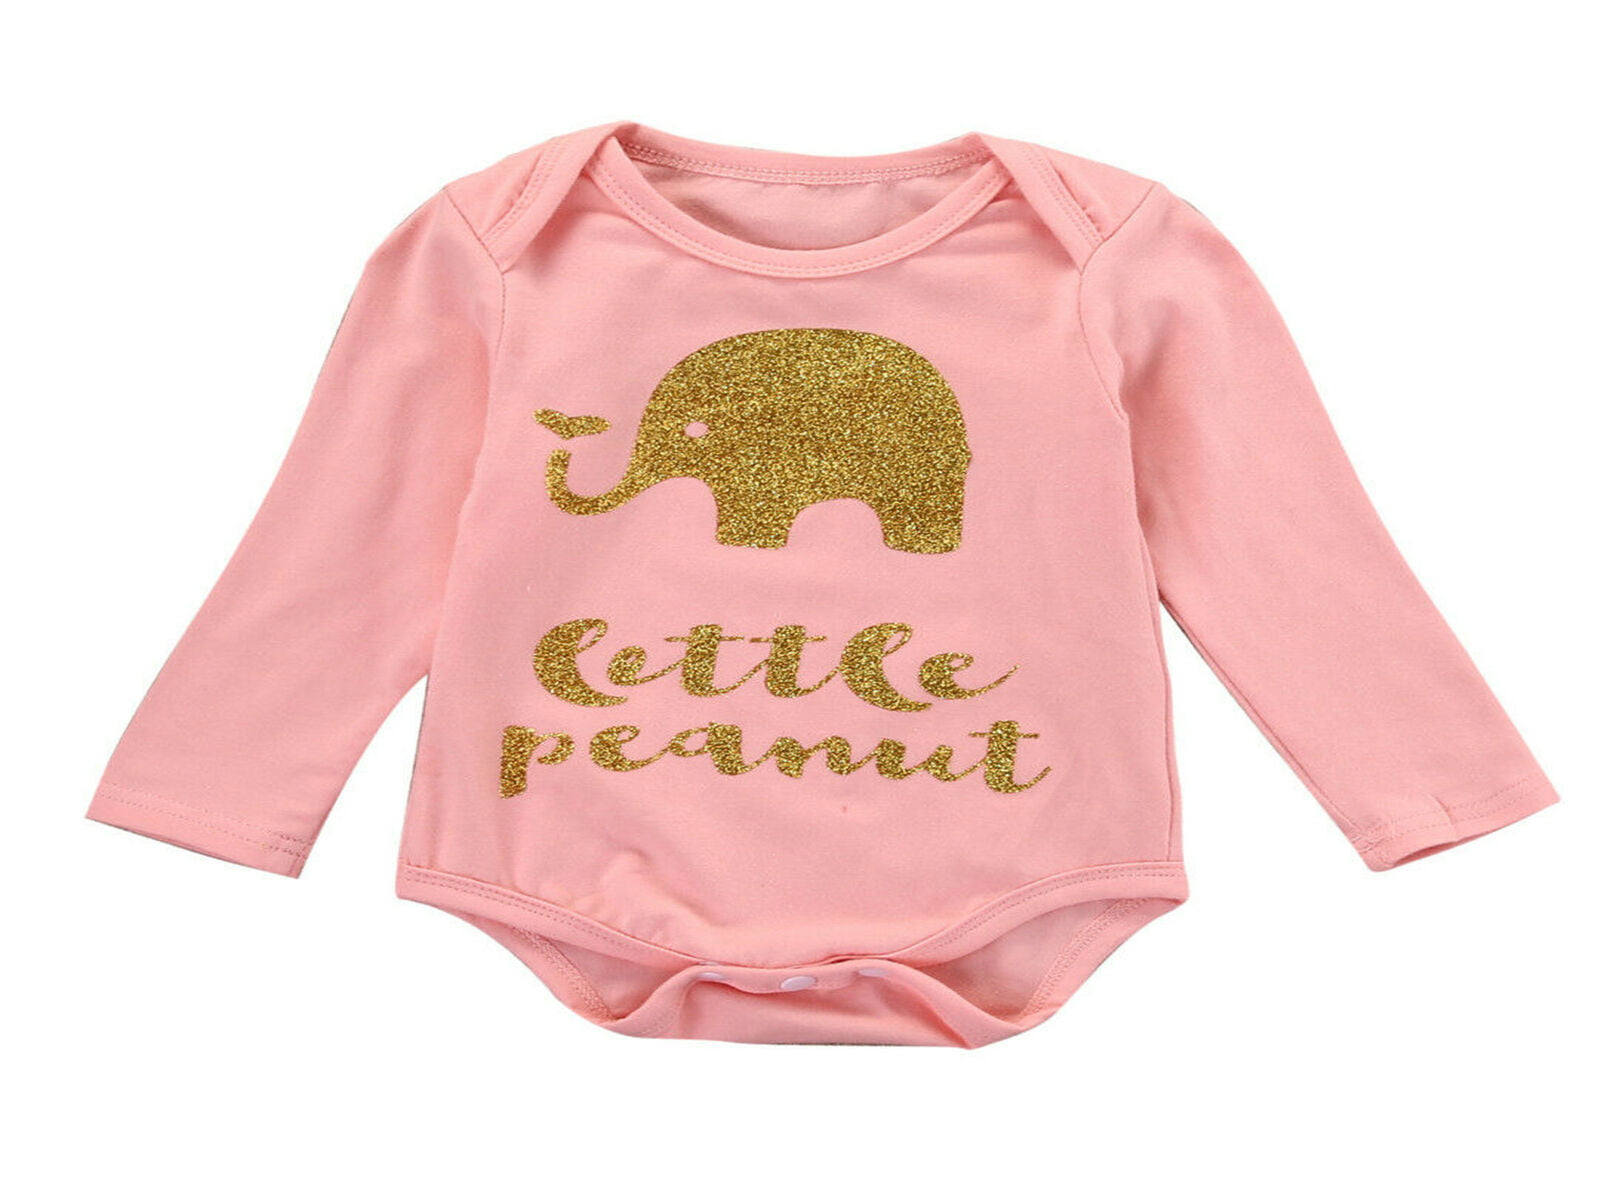 Elephant Infant Baby Girls Cotton Long Sleeve Clothes Bodysuit Romper Outfit US 